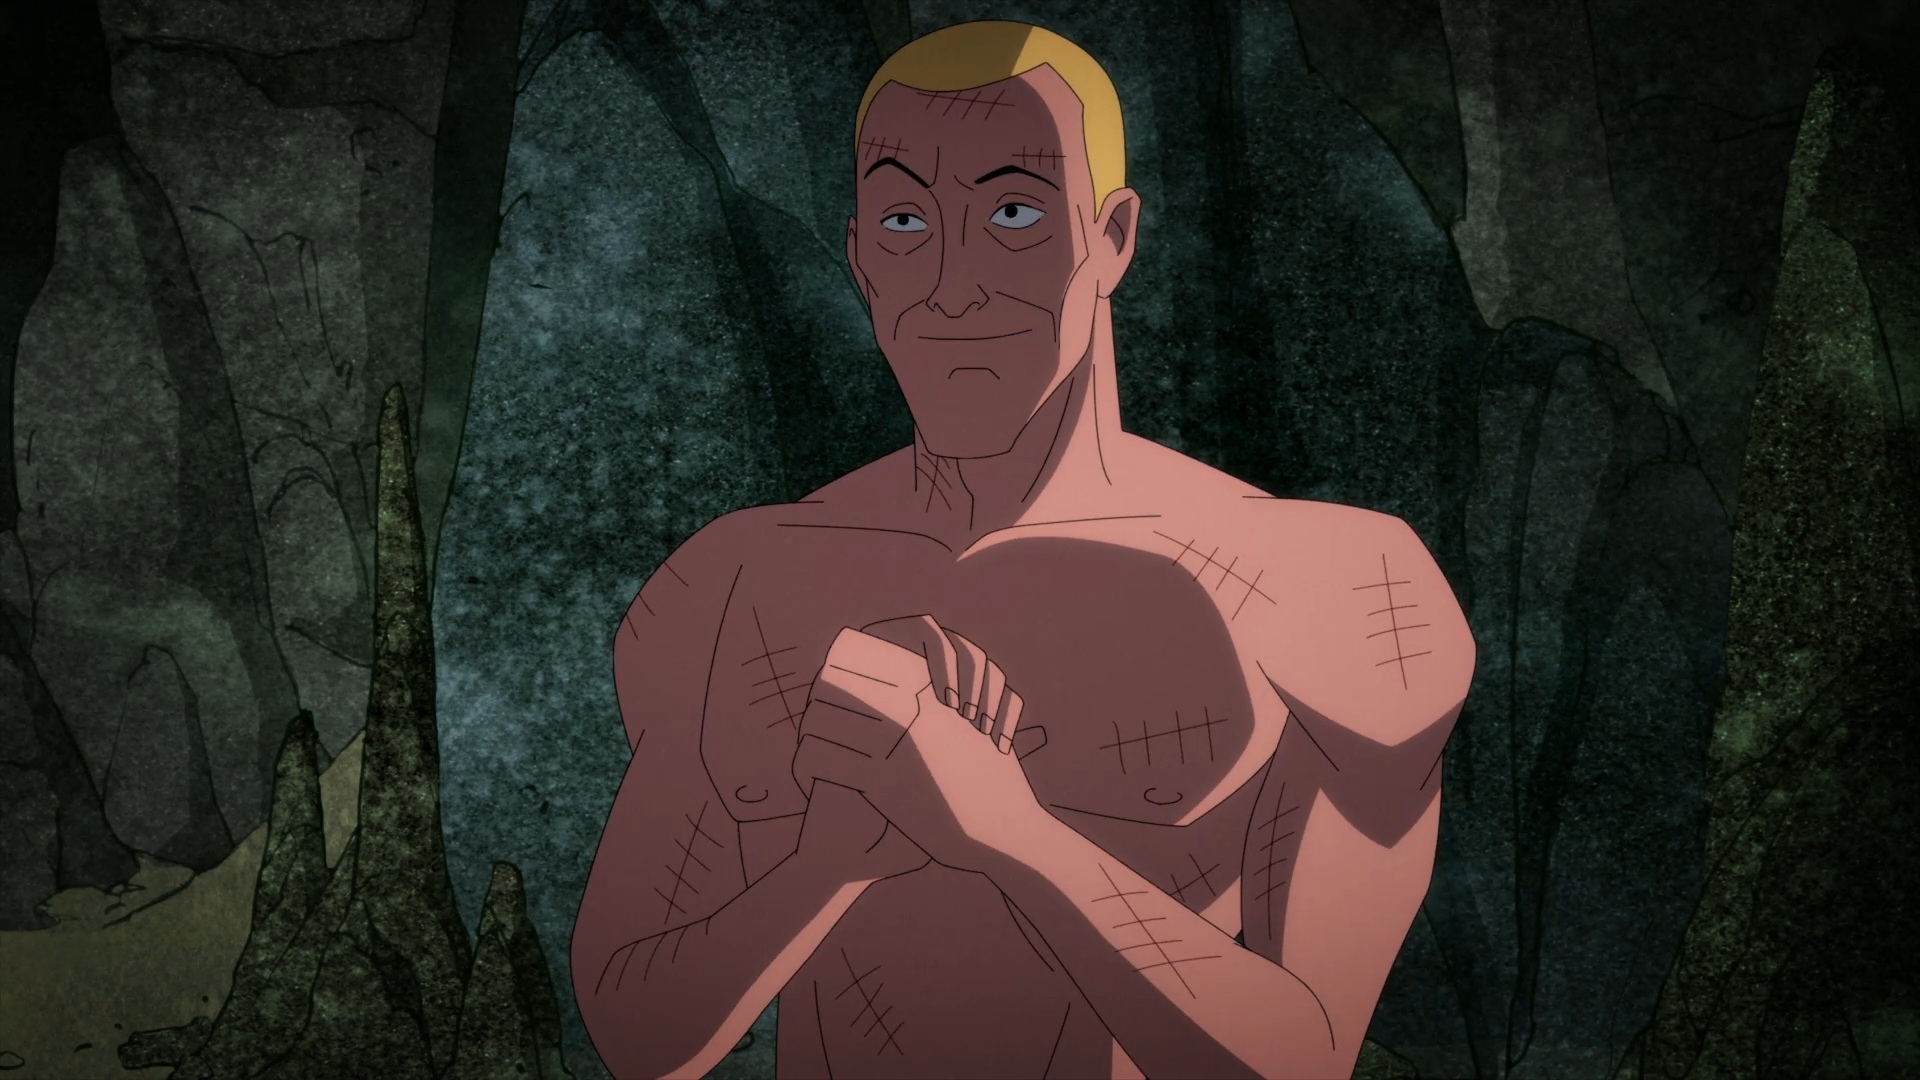 Victor Zsasz by Harley Quinn animated Series